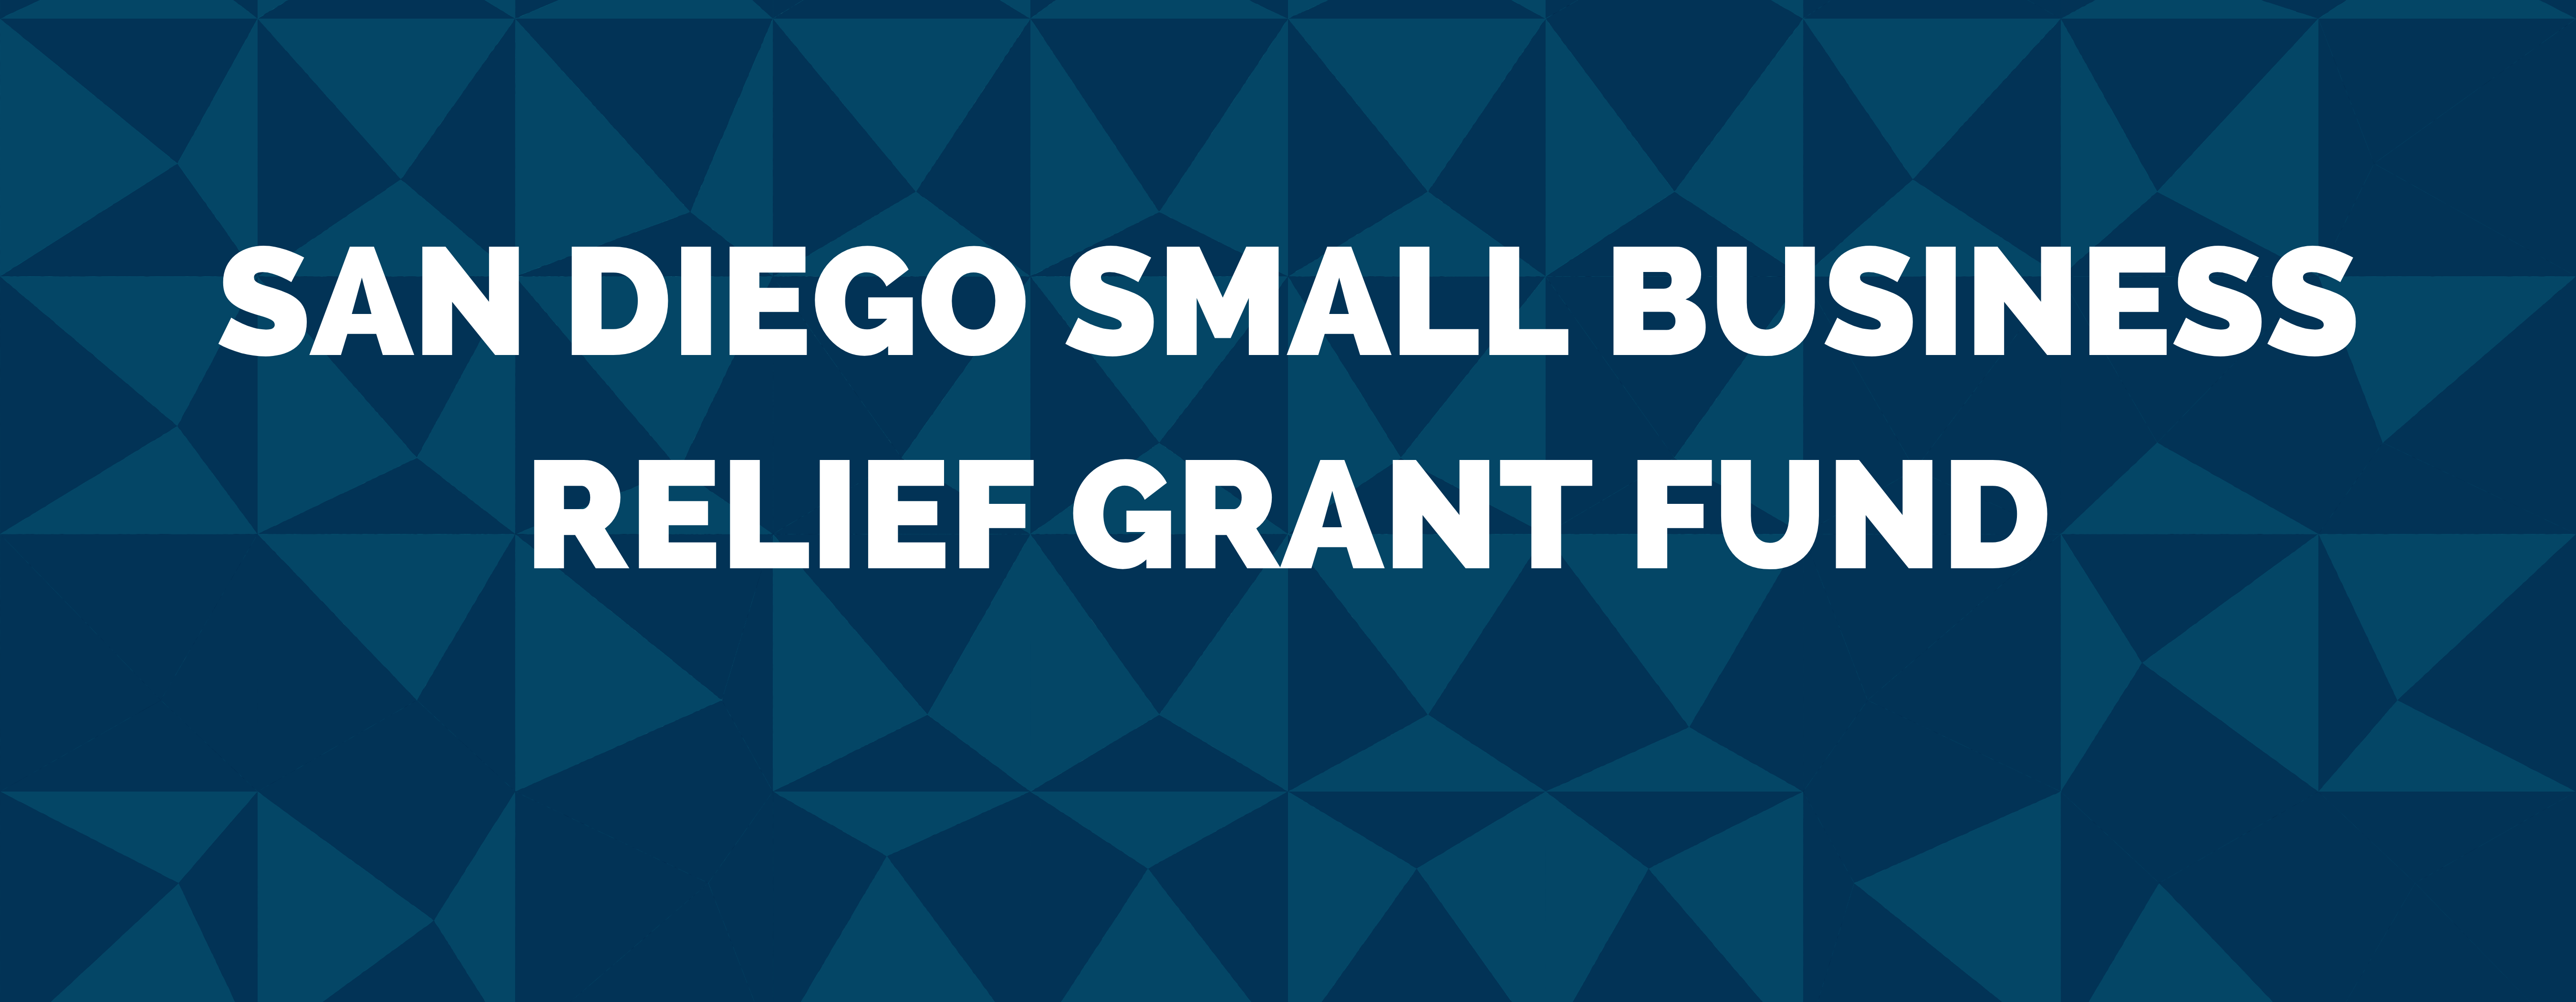 Small Business Fund